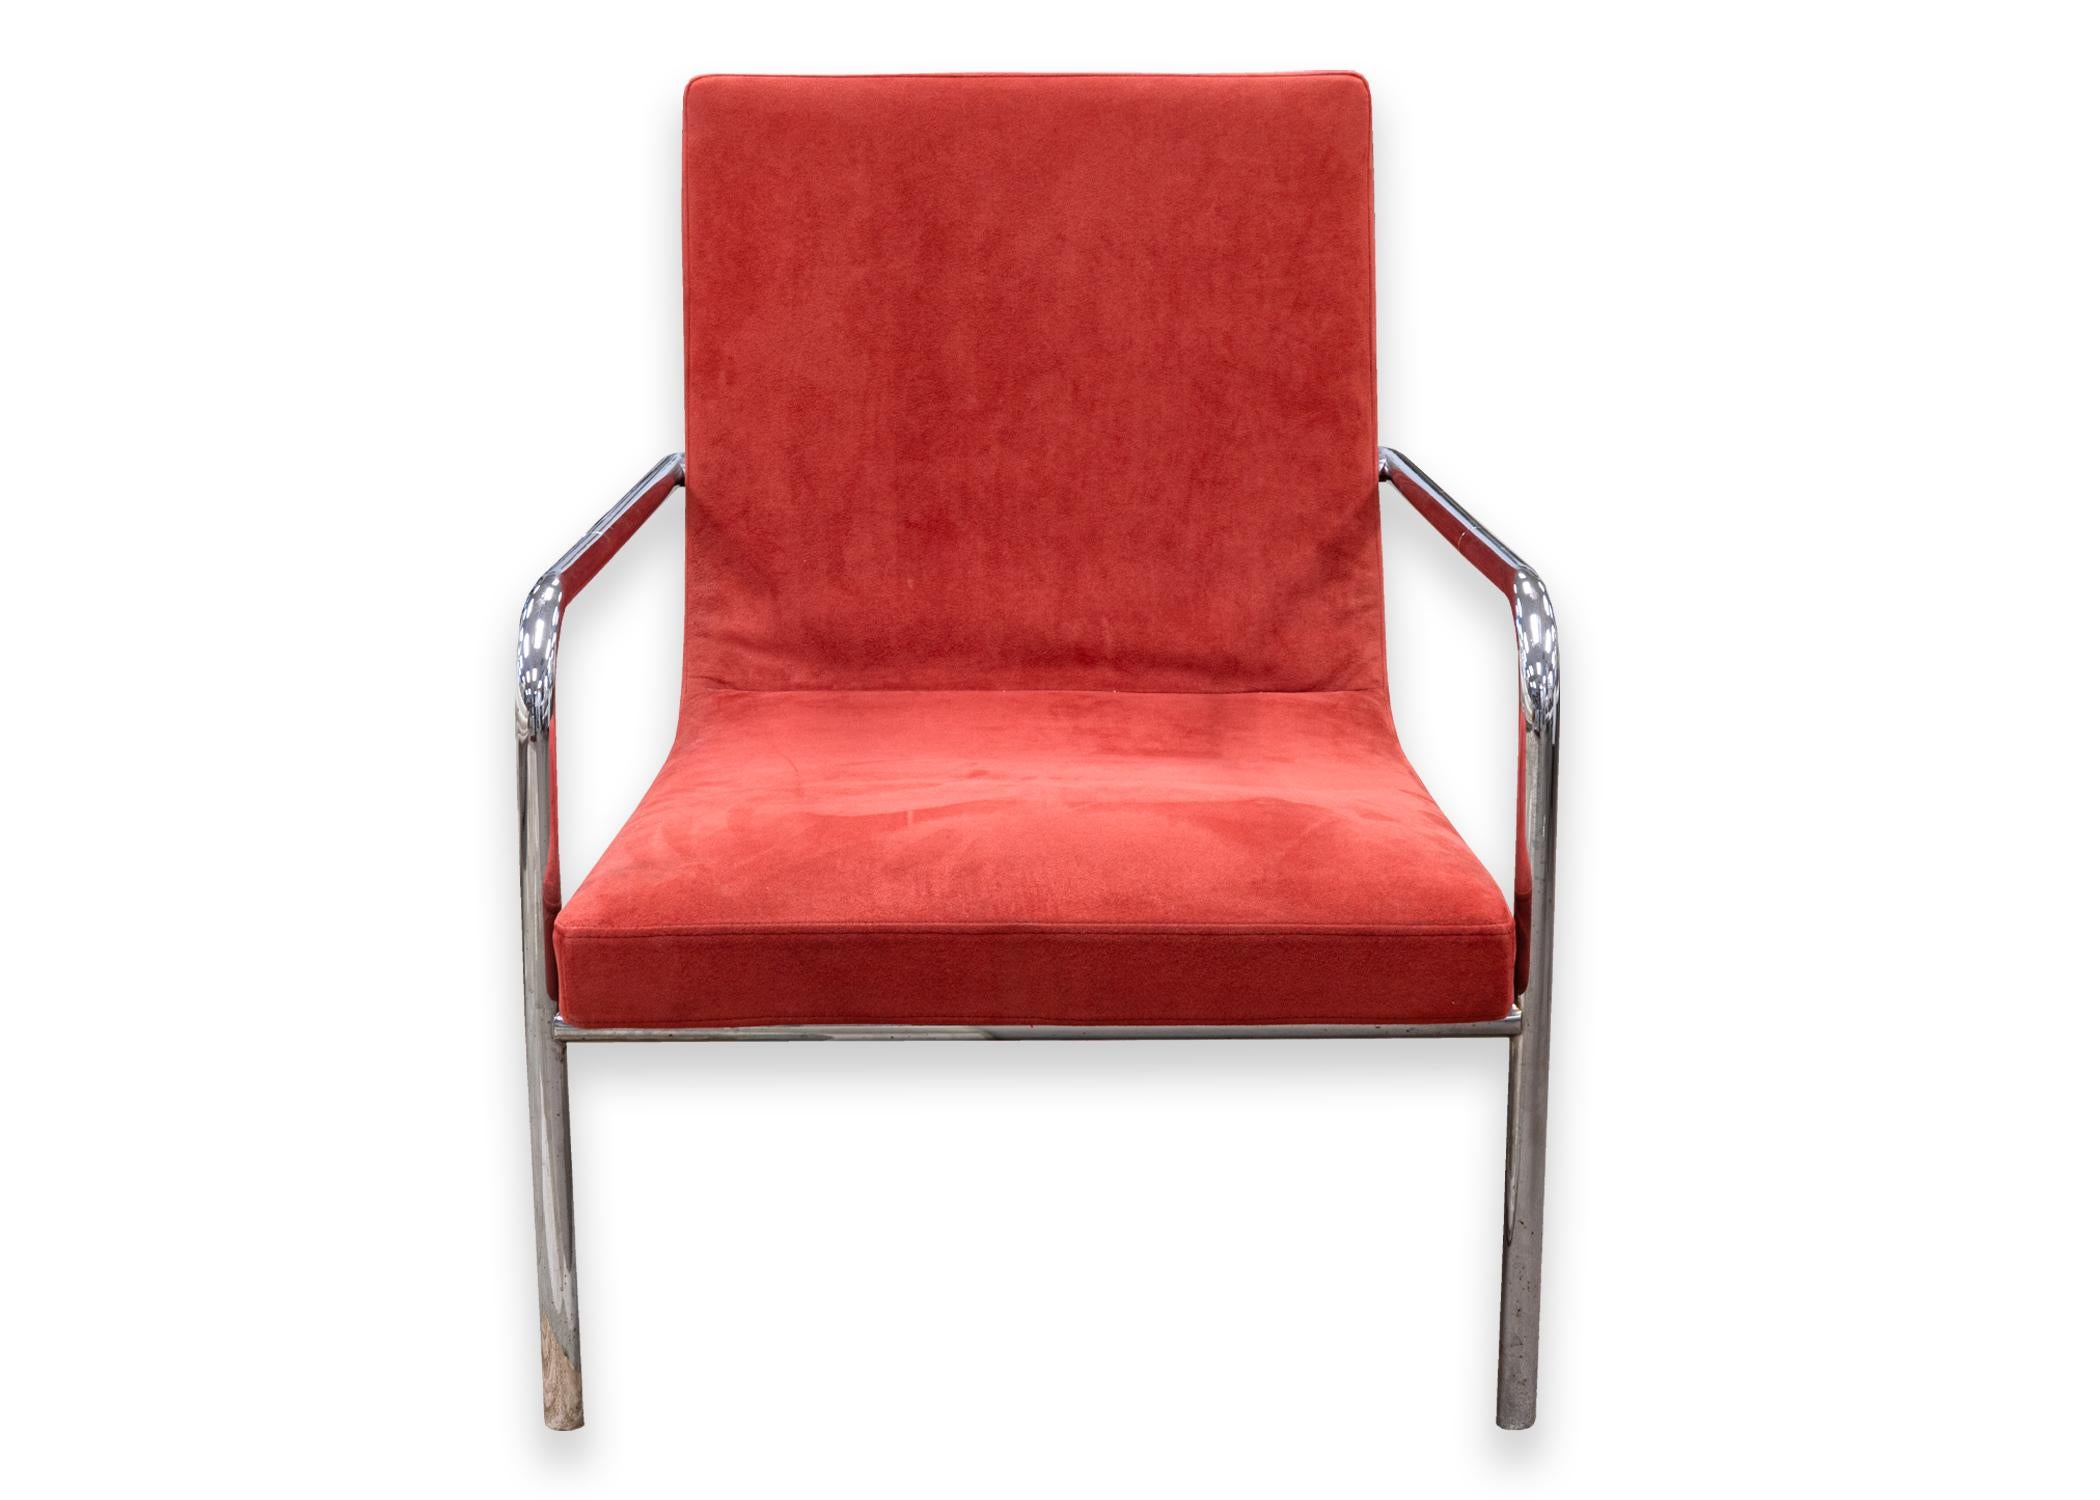 A Ligne Roset Dessau lounge chair. A gorgeous contemporary accent chair. This piece features a tubular chrome frame, arms and legs, and a super chic soft red suede leather upholstery. This piece is in very good condition. The original Ligne Roset